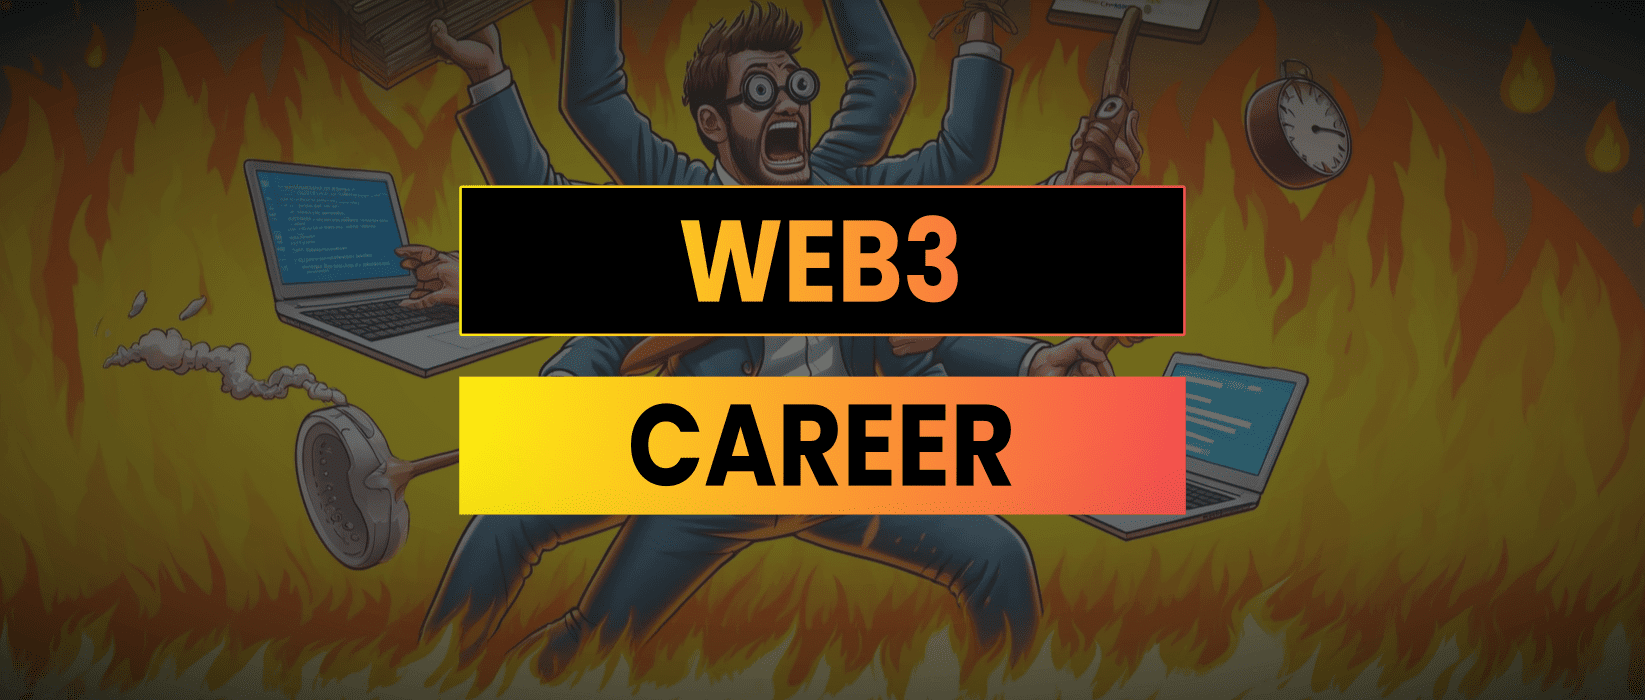 Building a Career in Web3